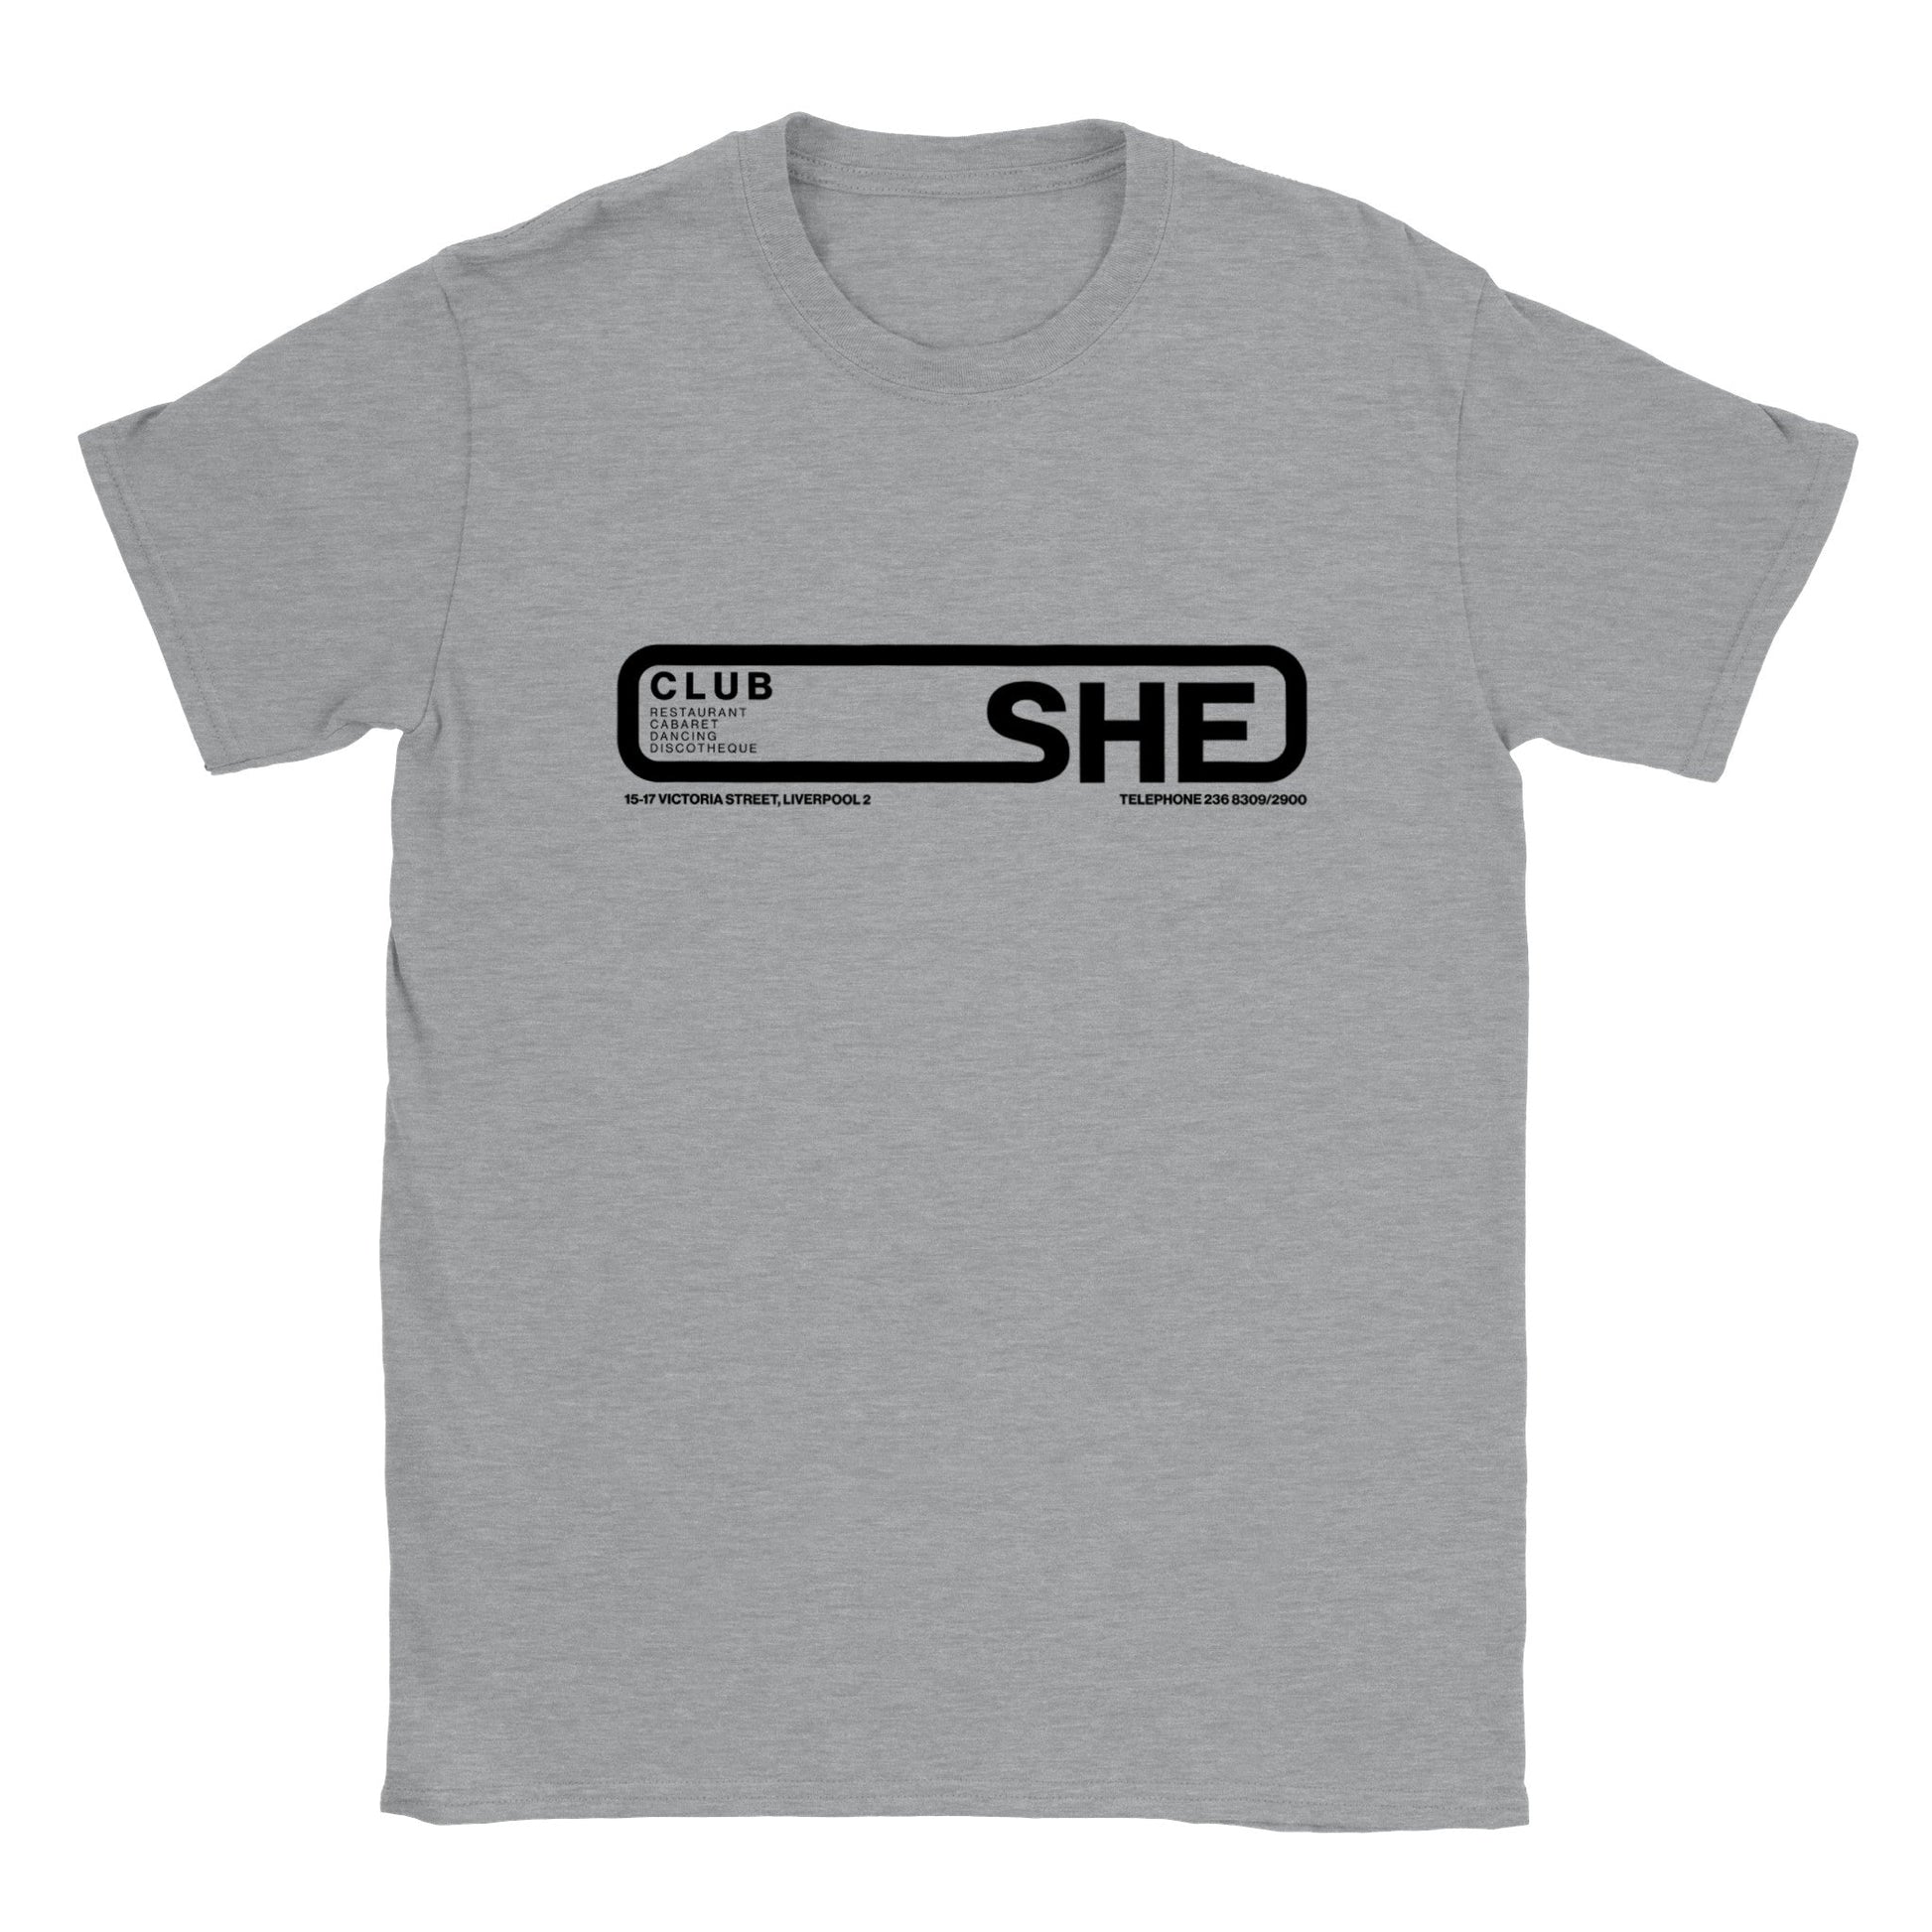 She Club unisex T-shirt - various colours - Dirty Stop Outs